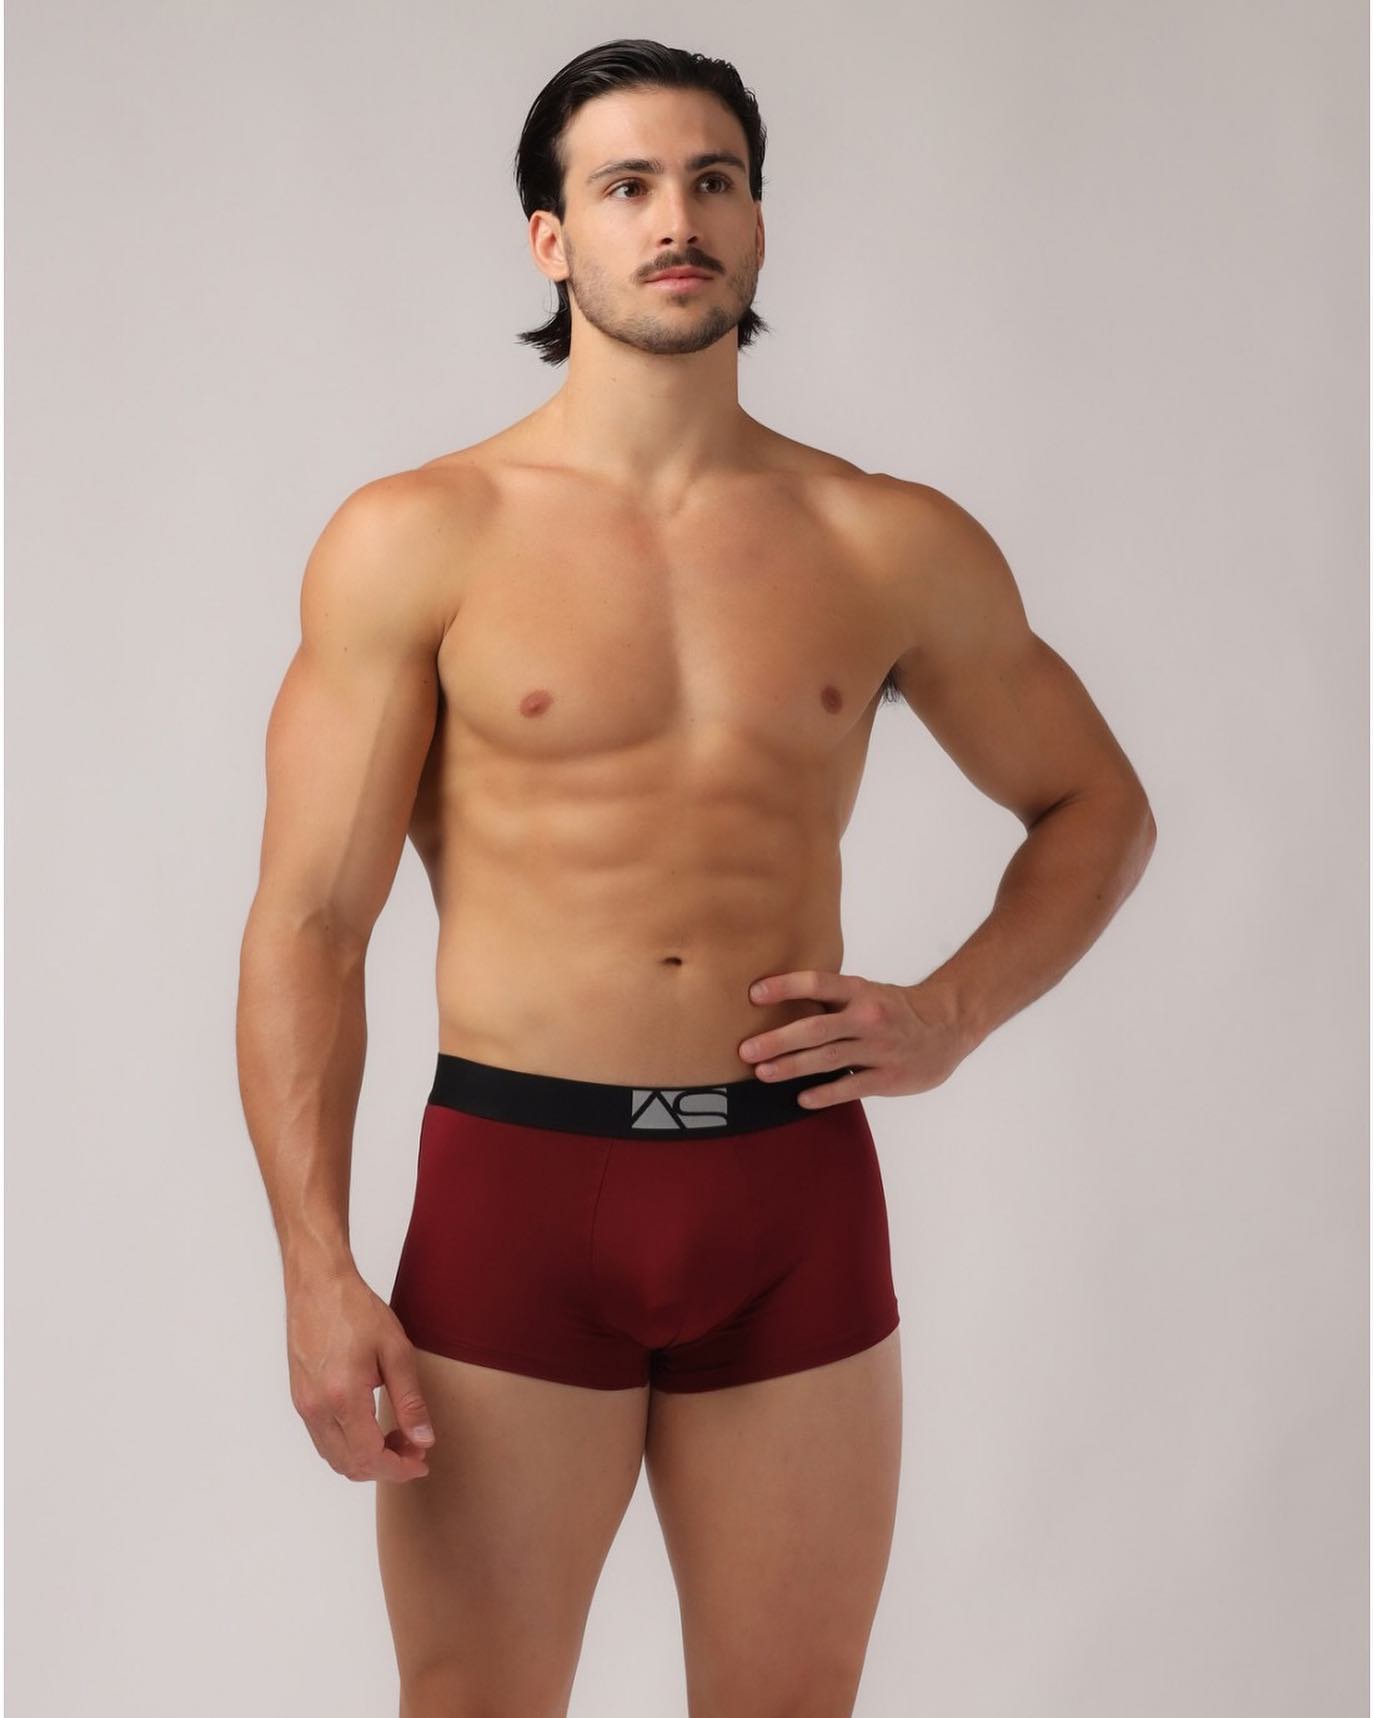 25 days to Christmas! Here is something from our Christmas Shopping guide this year, the Perfect Boyshorts from AdamSmithWear in burgundy red. Take a look at this and lots more:
____
https://menandunderwear.com/shop/christmas